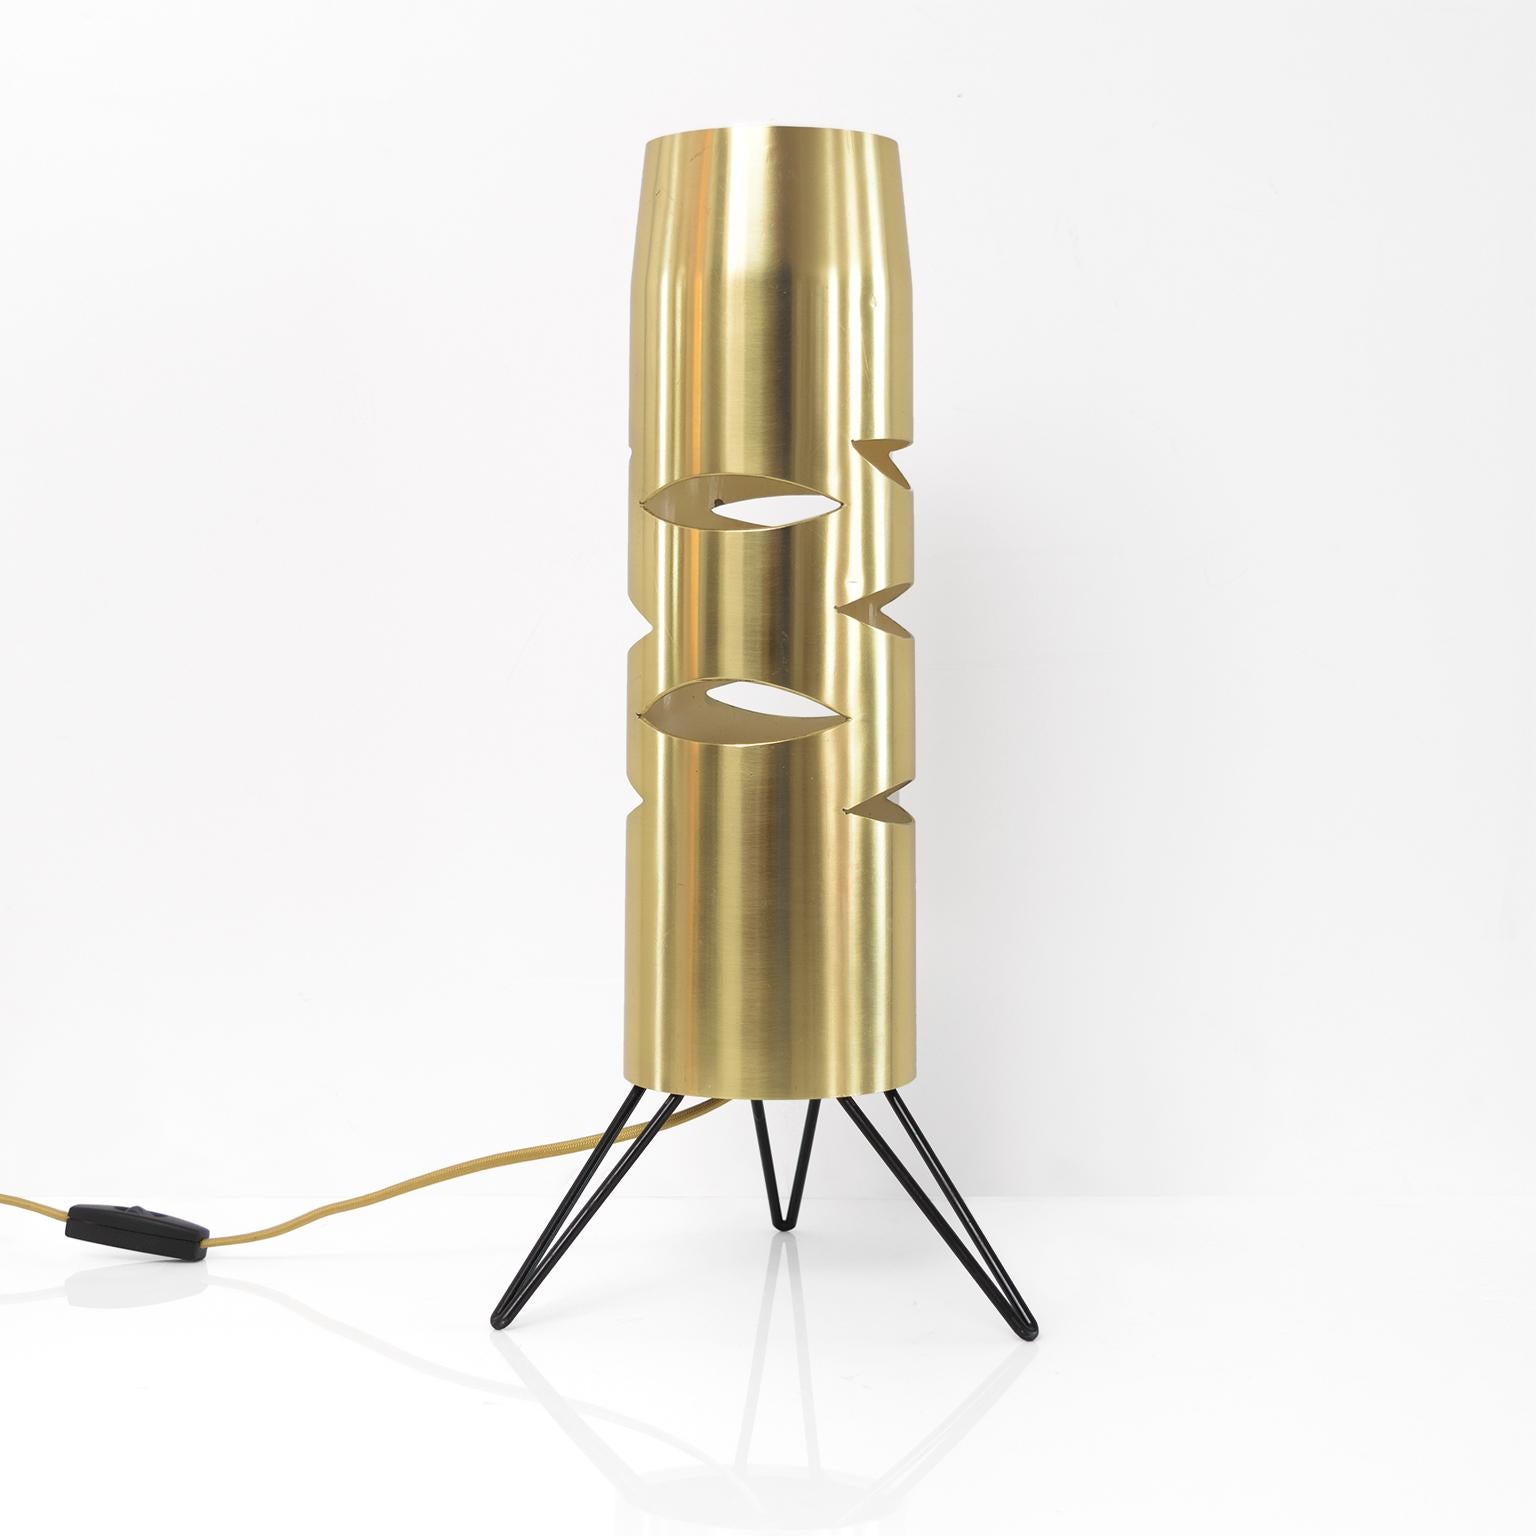 Scandinavian Modern polished solid brass cylindrical table lamp with eye shaped cutouts which references the surrealist movement. The lamps inside has it original baked enamel finish in an off white color. The tripod base is black lacquered metal,